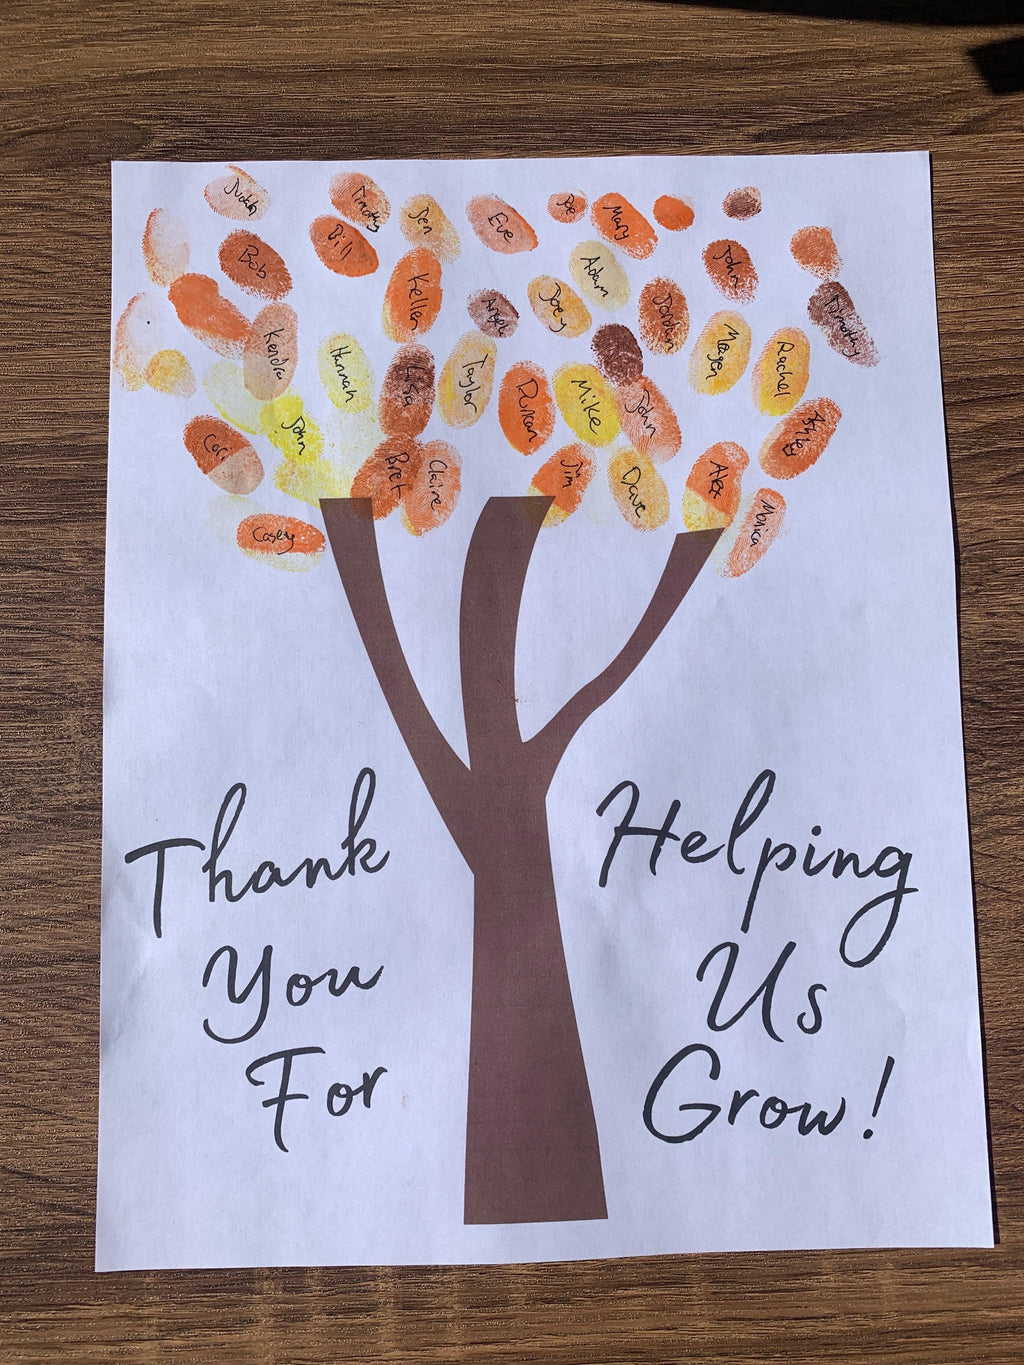 100+ Thanksgiving Craft Ideas for Sunday School - Ministry Advice